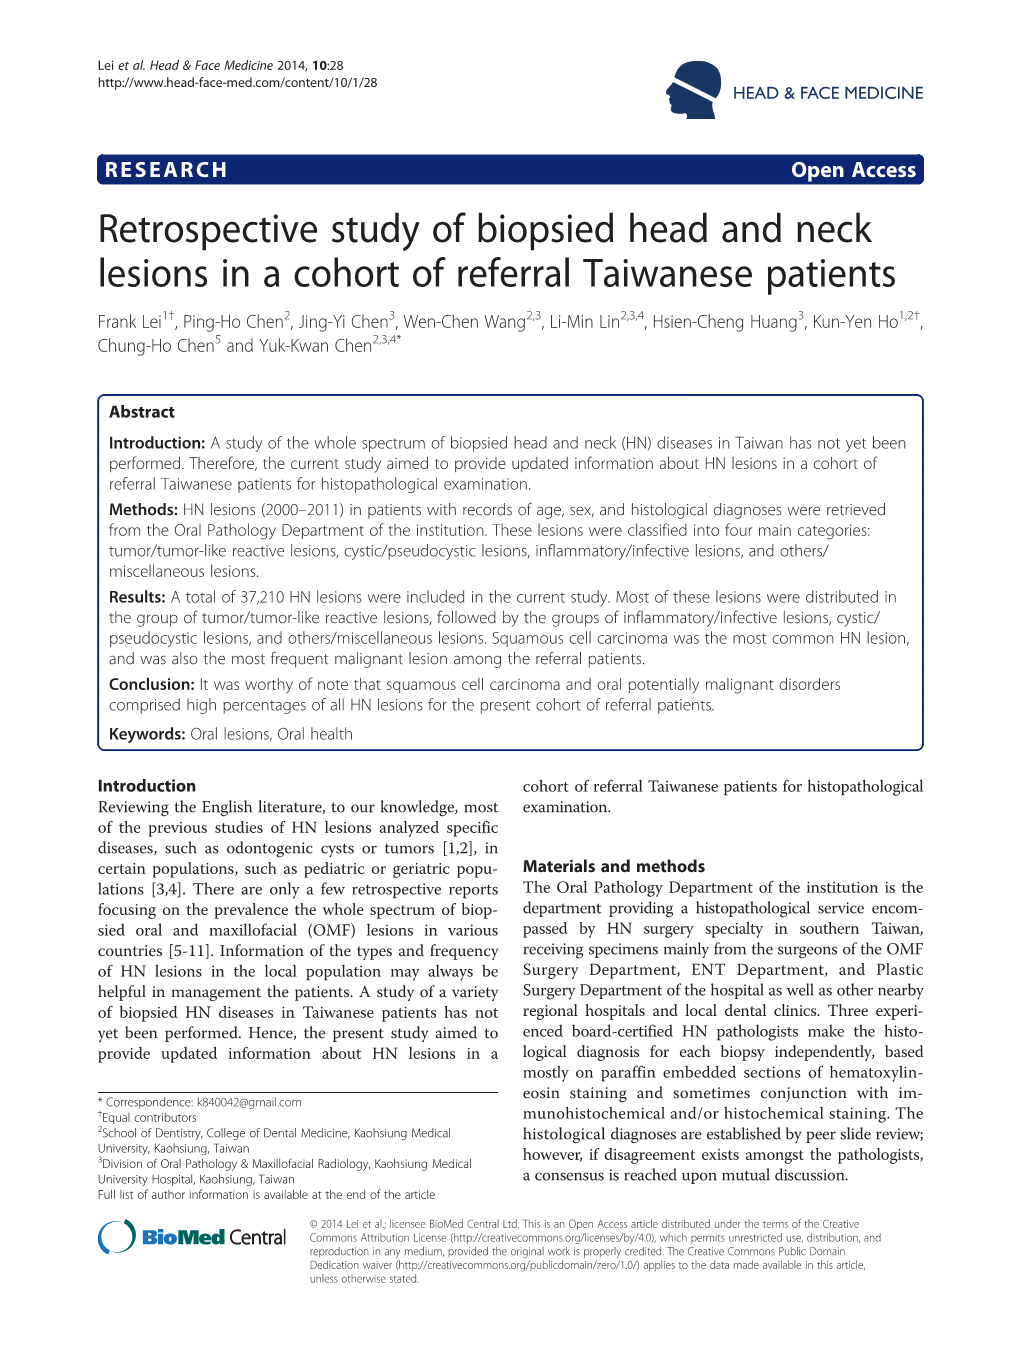 Retrospective Study of Biopsied Head and Neck Lesions in a Cohort Of